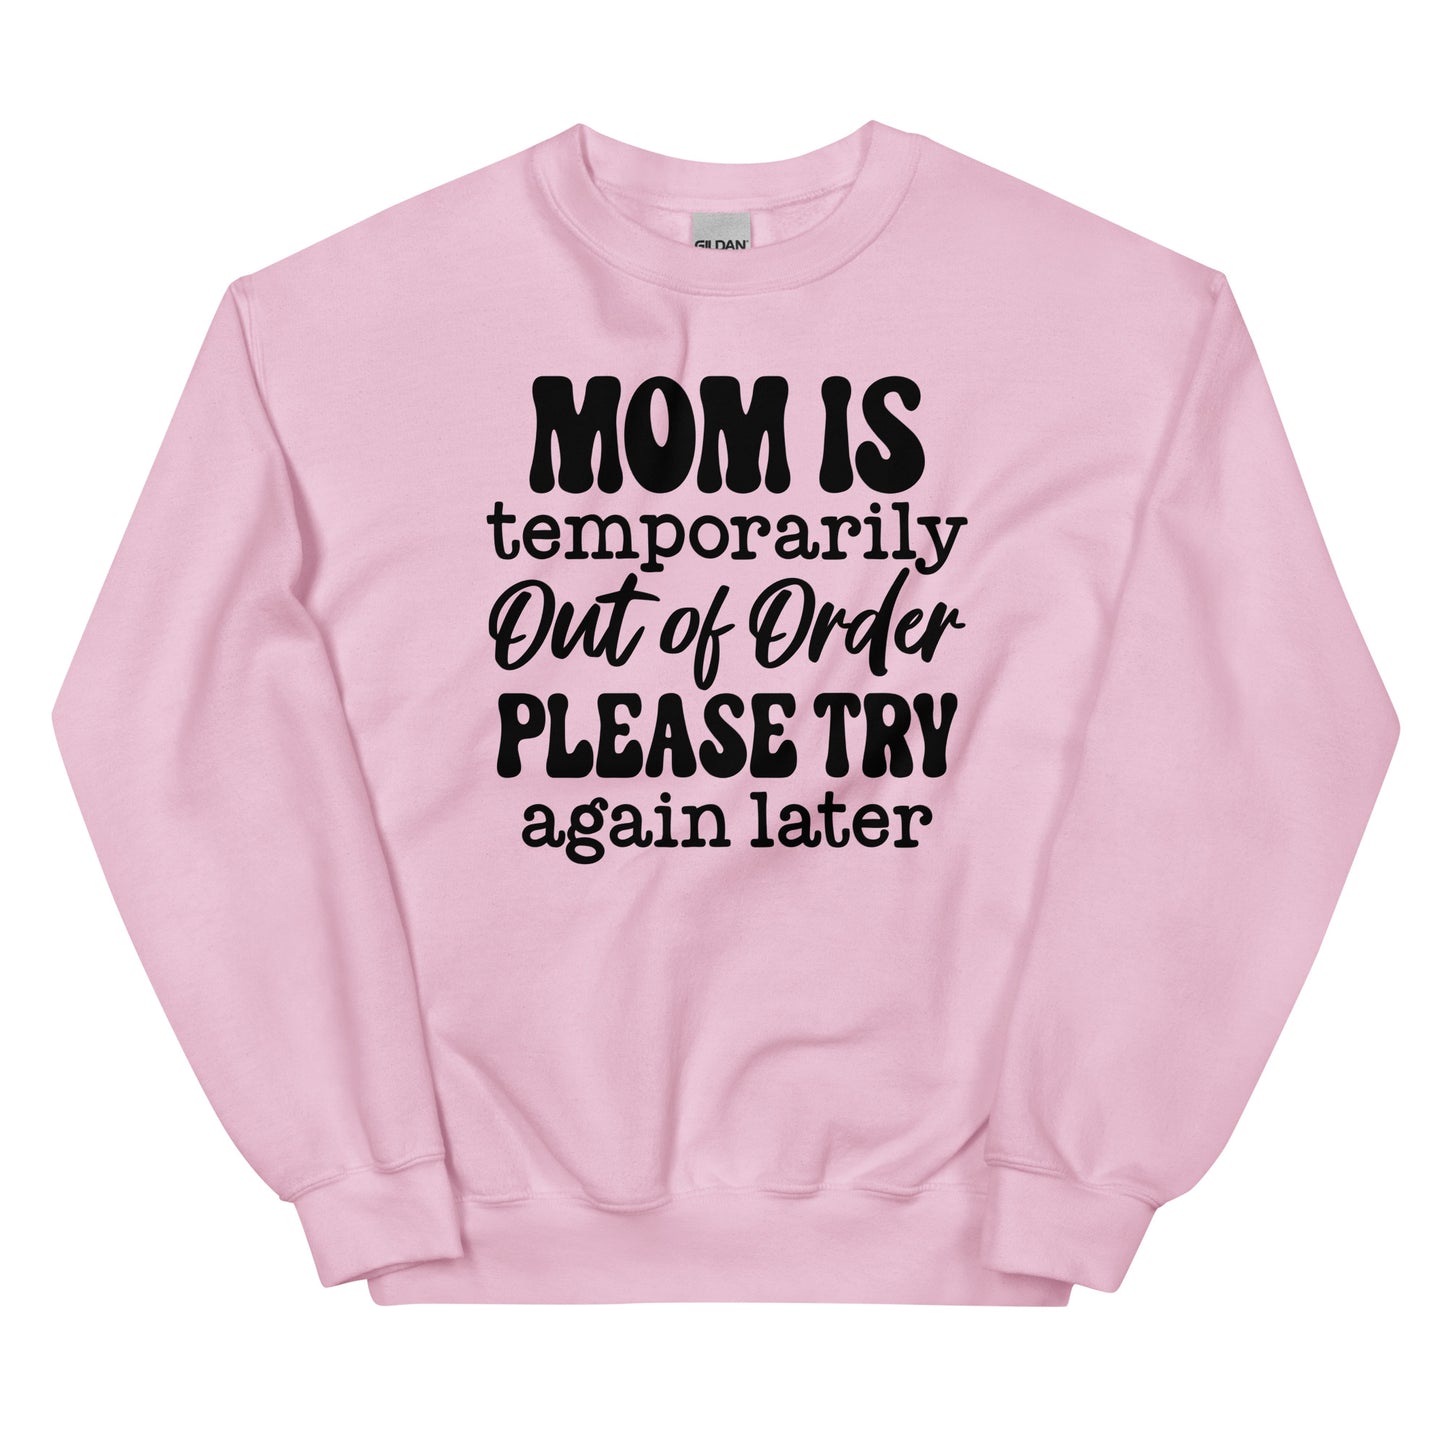 Mom is Temporarily Out of Order, Please Try Again Later Crewneck Pullover Sweatshirt